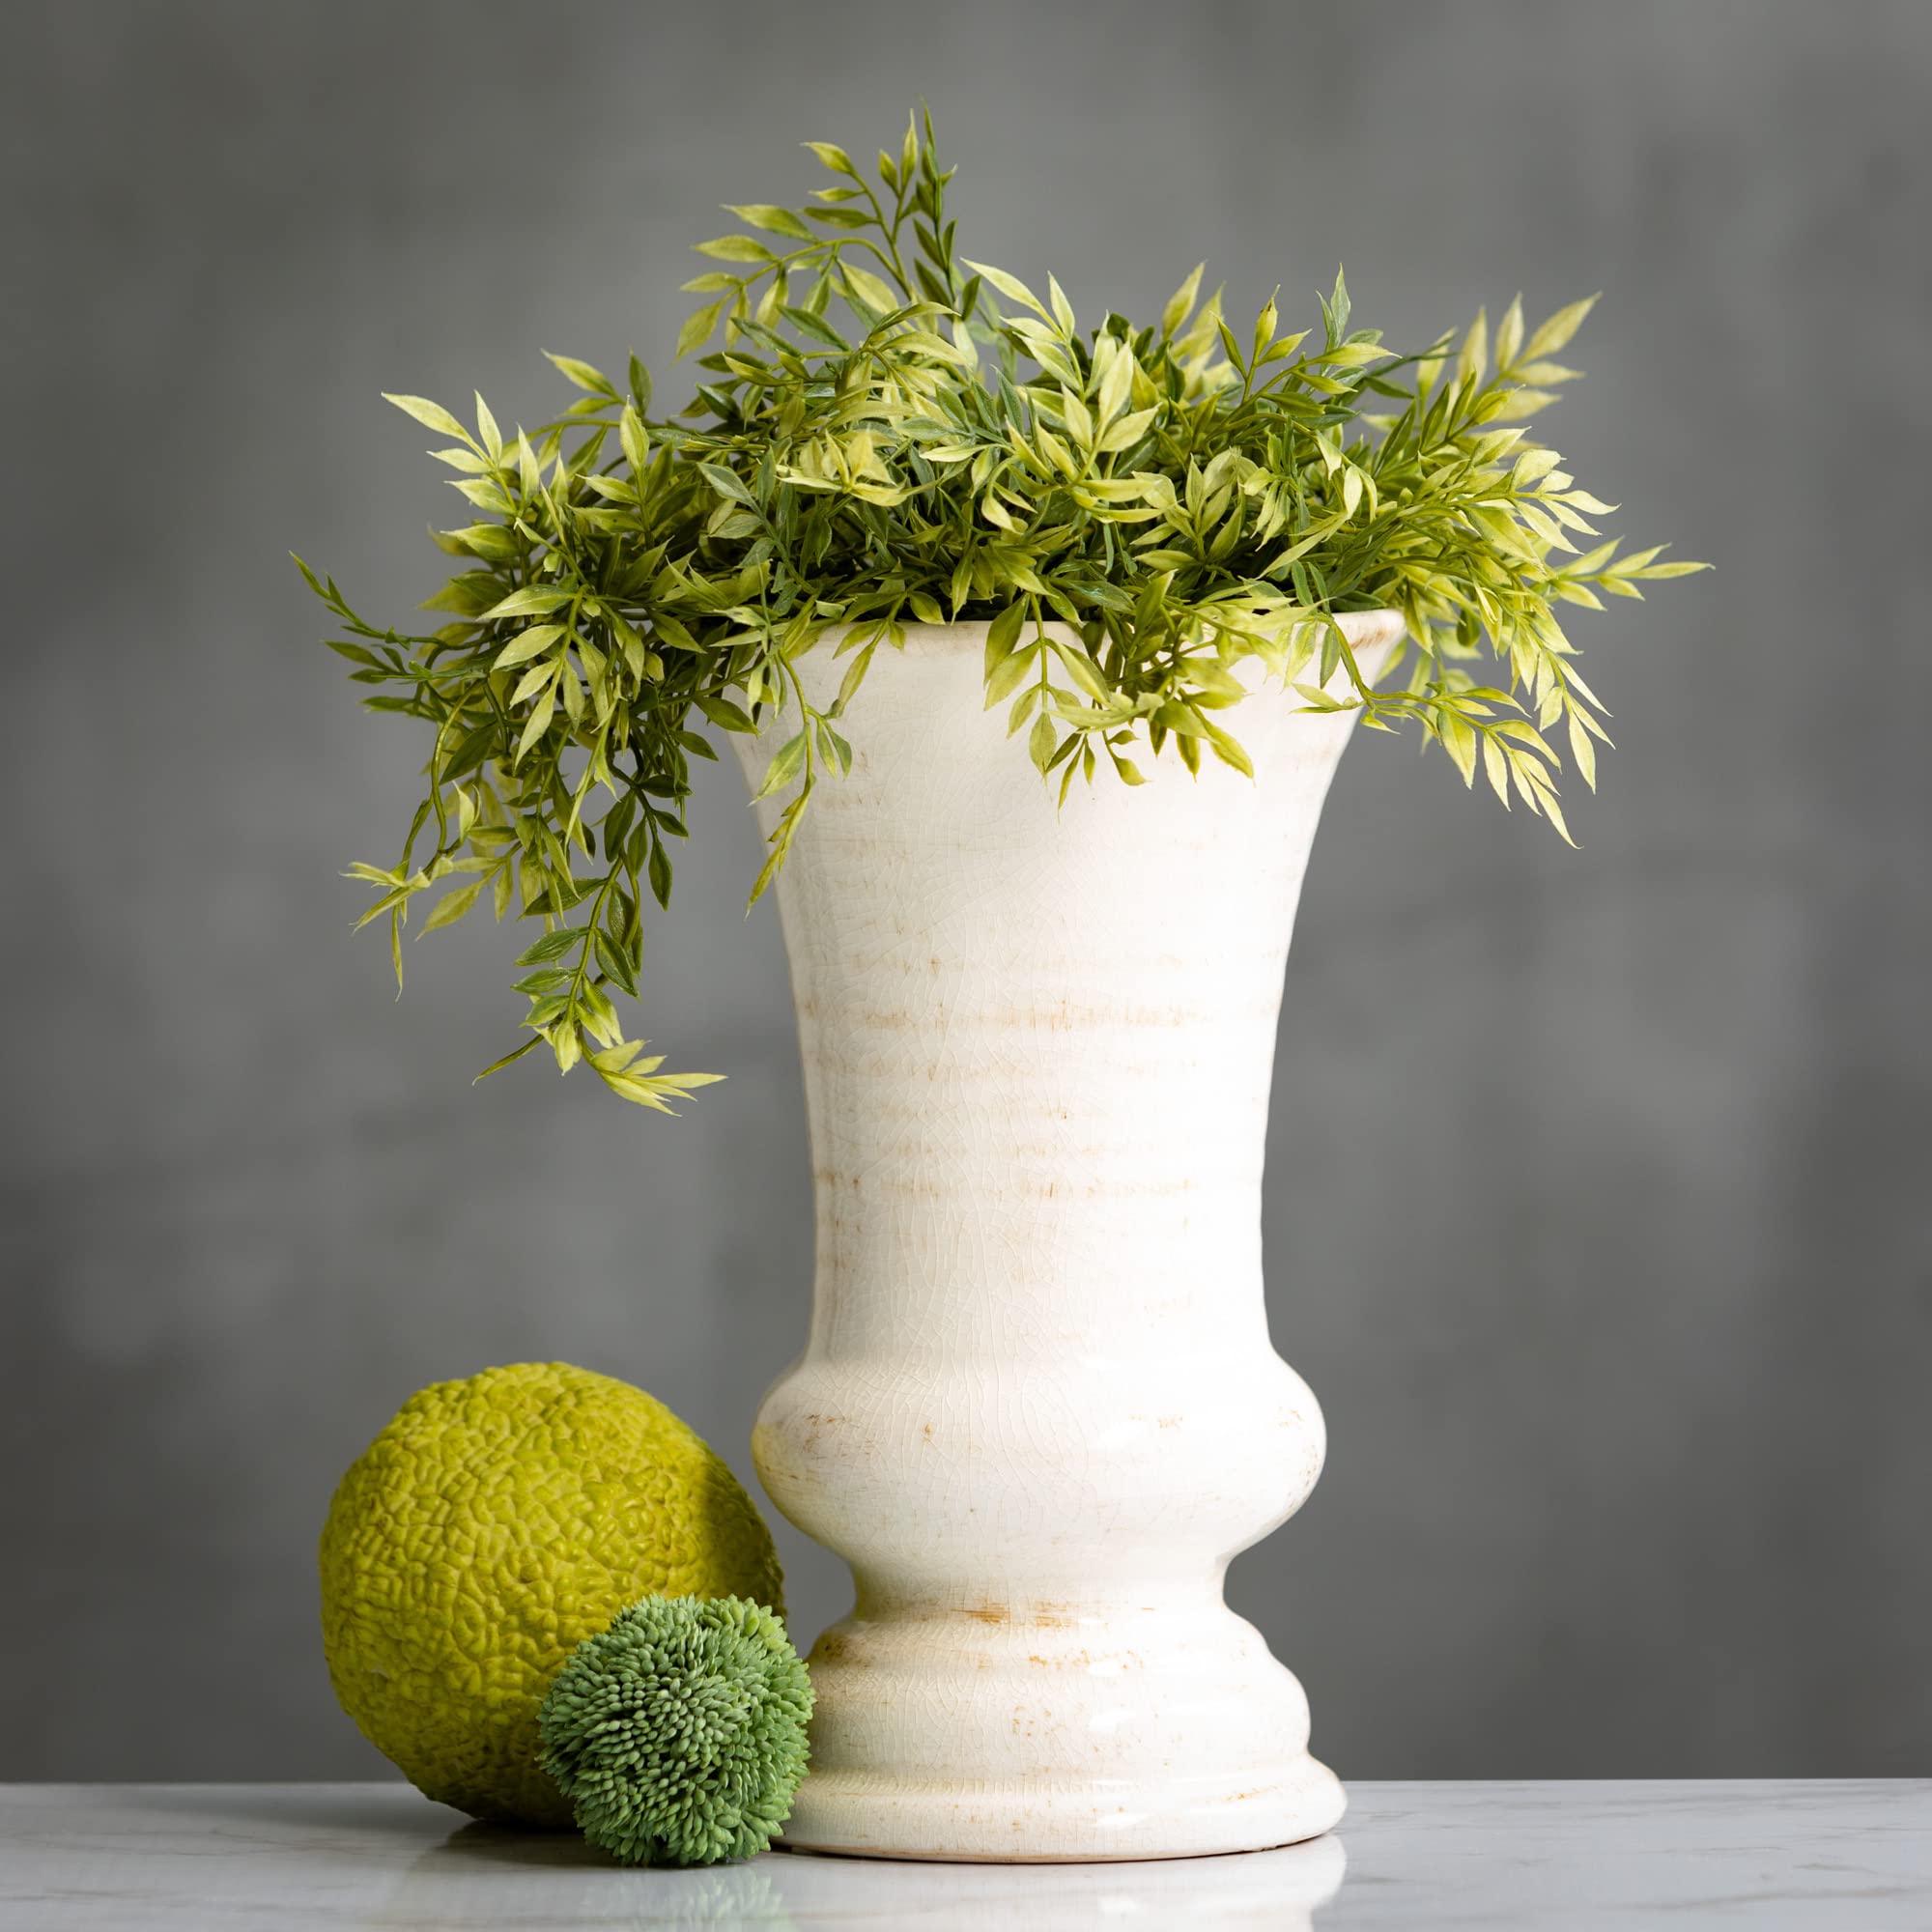 Sullivans Modern Farmhouse Decorative Ceramic Vase, 6 x 6 x 10 inches, Distressed Decoration for Farmhouse Décor, Off-White Crackled Finish, Faux Floral Vase, Table Décor for Dining or Living Room